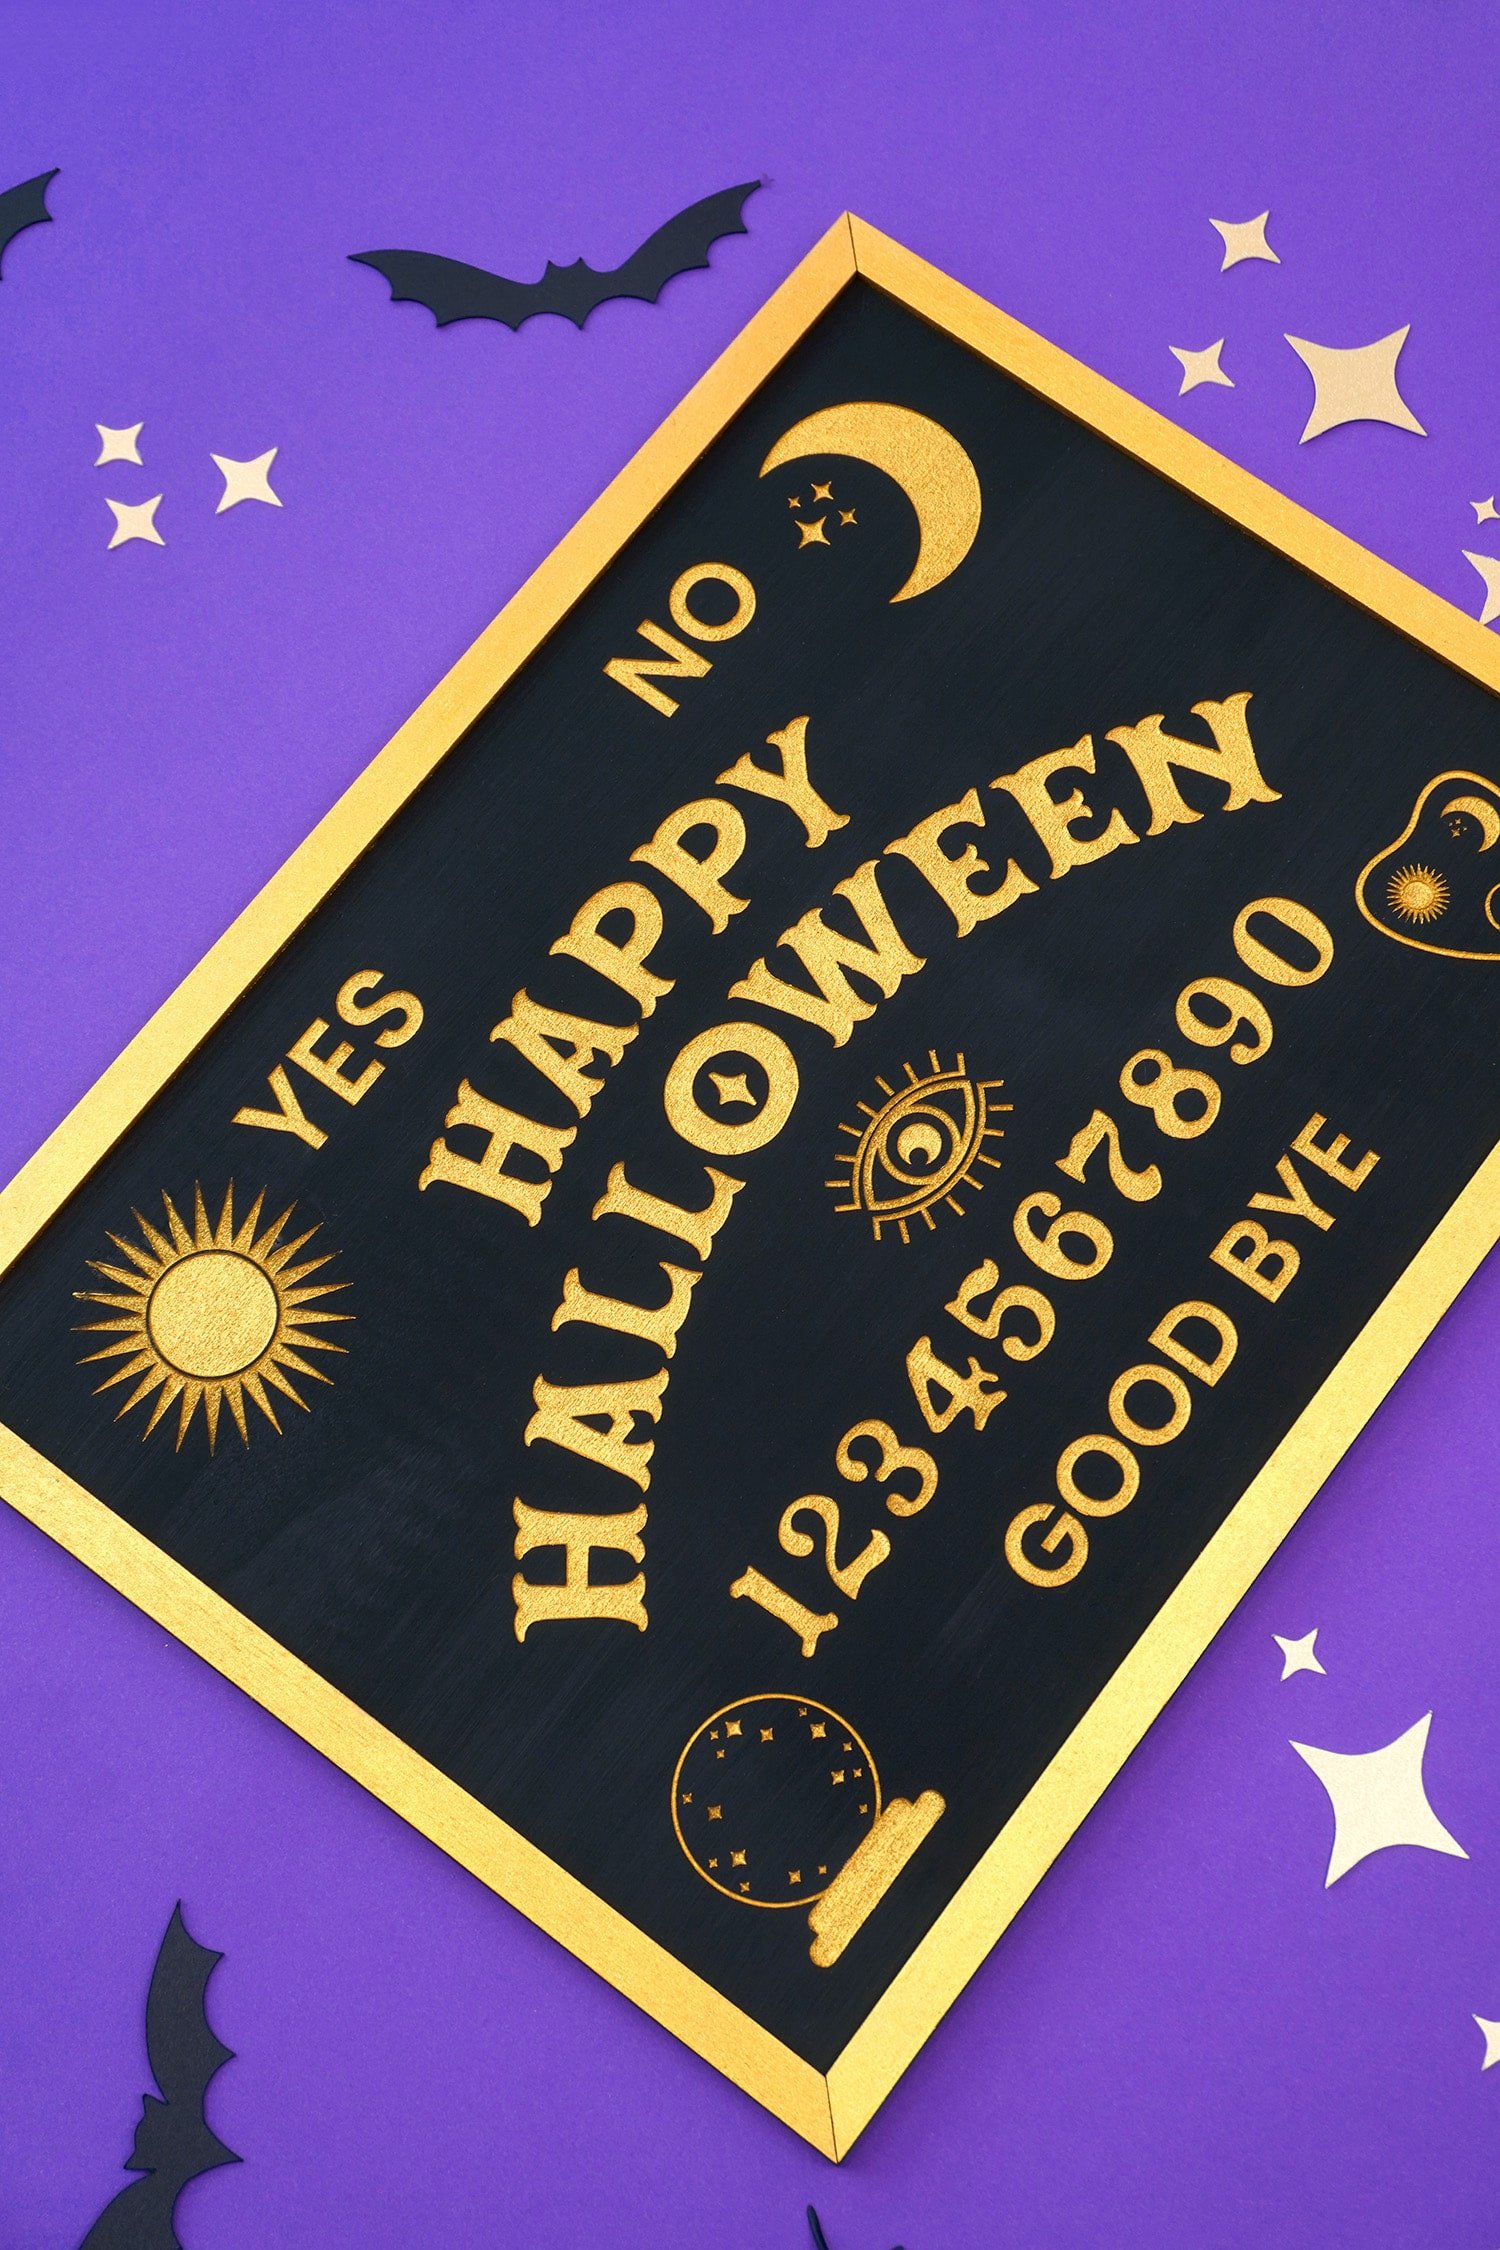 happy halloween sign ouija board inspired svg file 